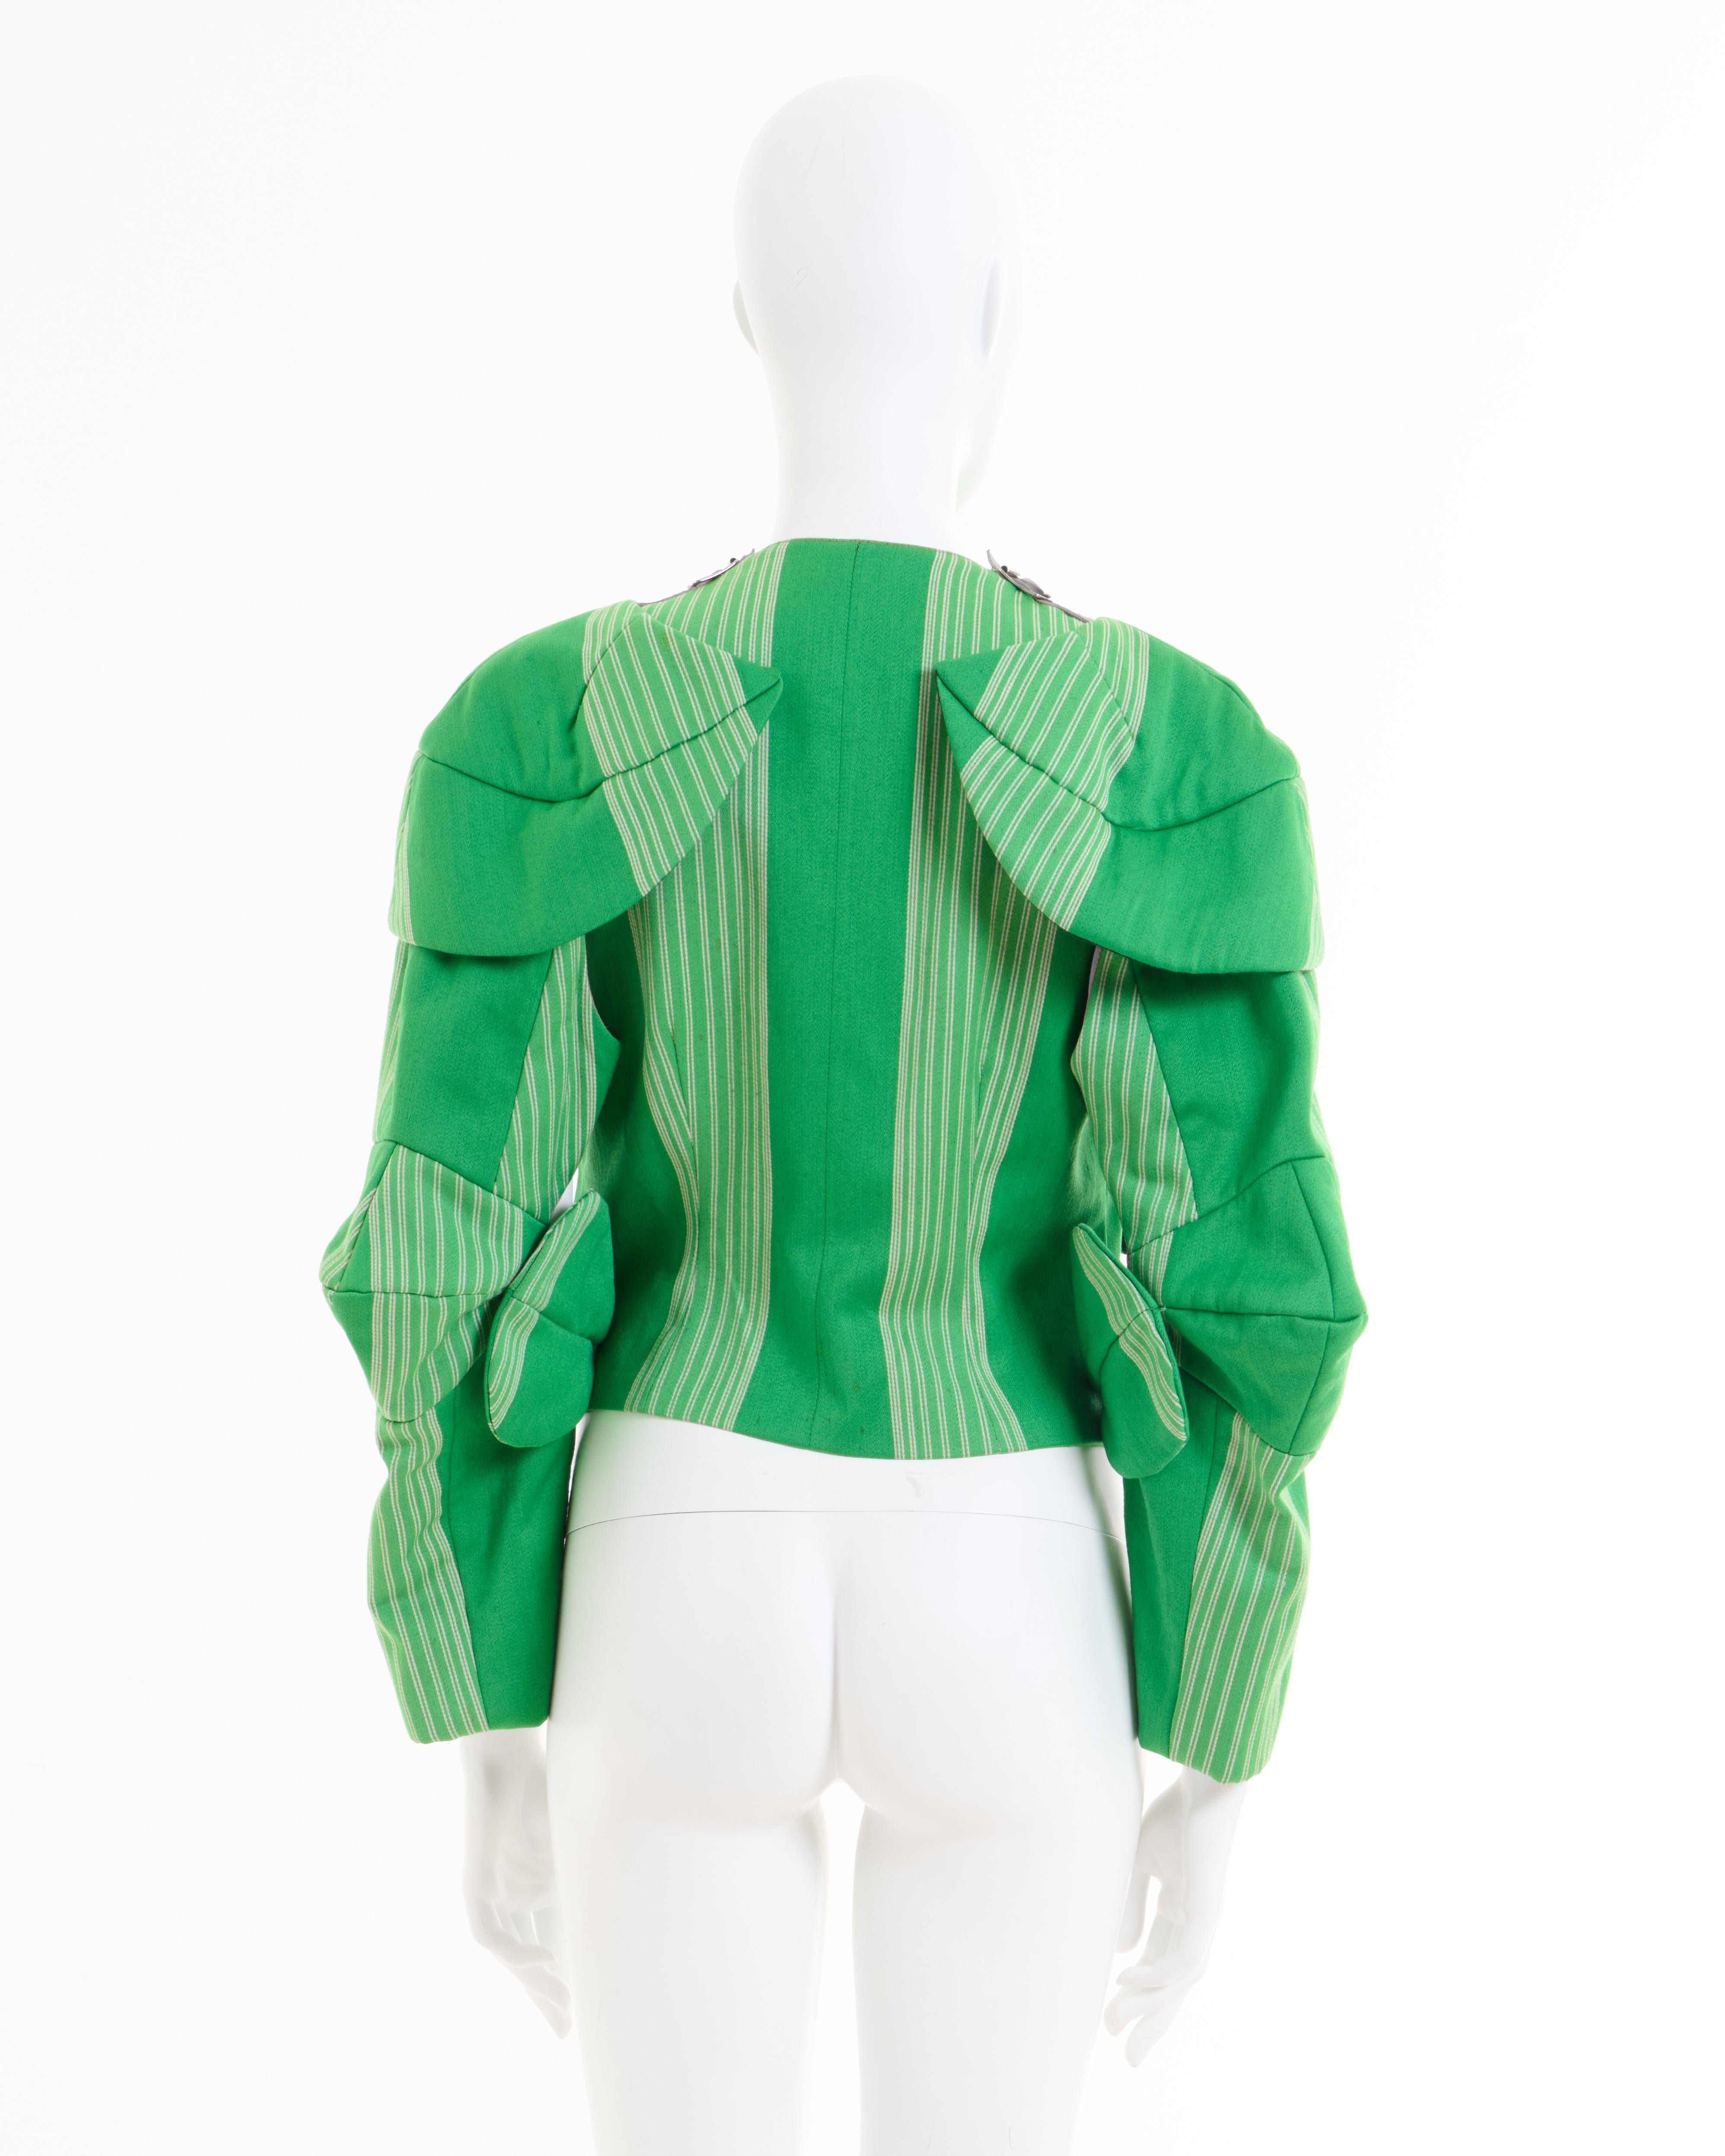 Vivienne Westwood  F/W 1988/89 ‘Time Machine’ Green striped Armour jacket In Good Condition For Sale In Milano, IT